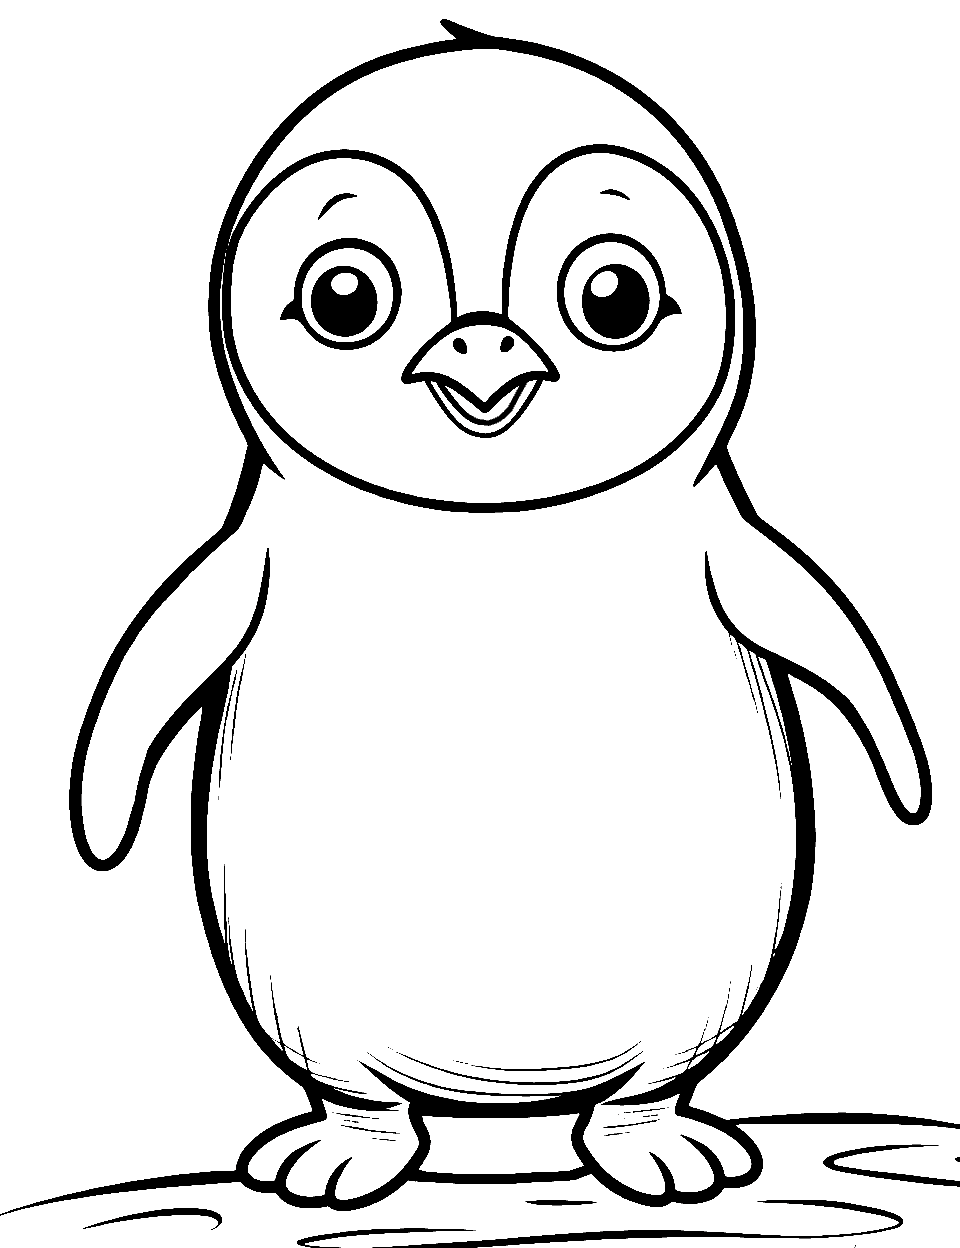 Cute Baby Penguin Coloring Page - A chubby baby penguin wobbling on the snow with big eyes.